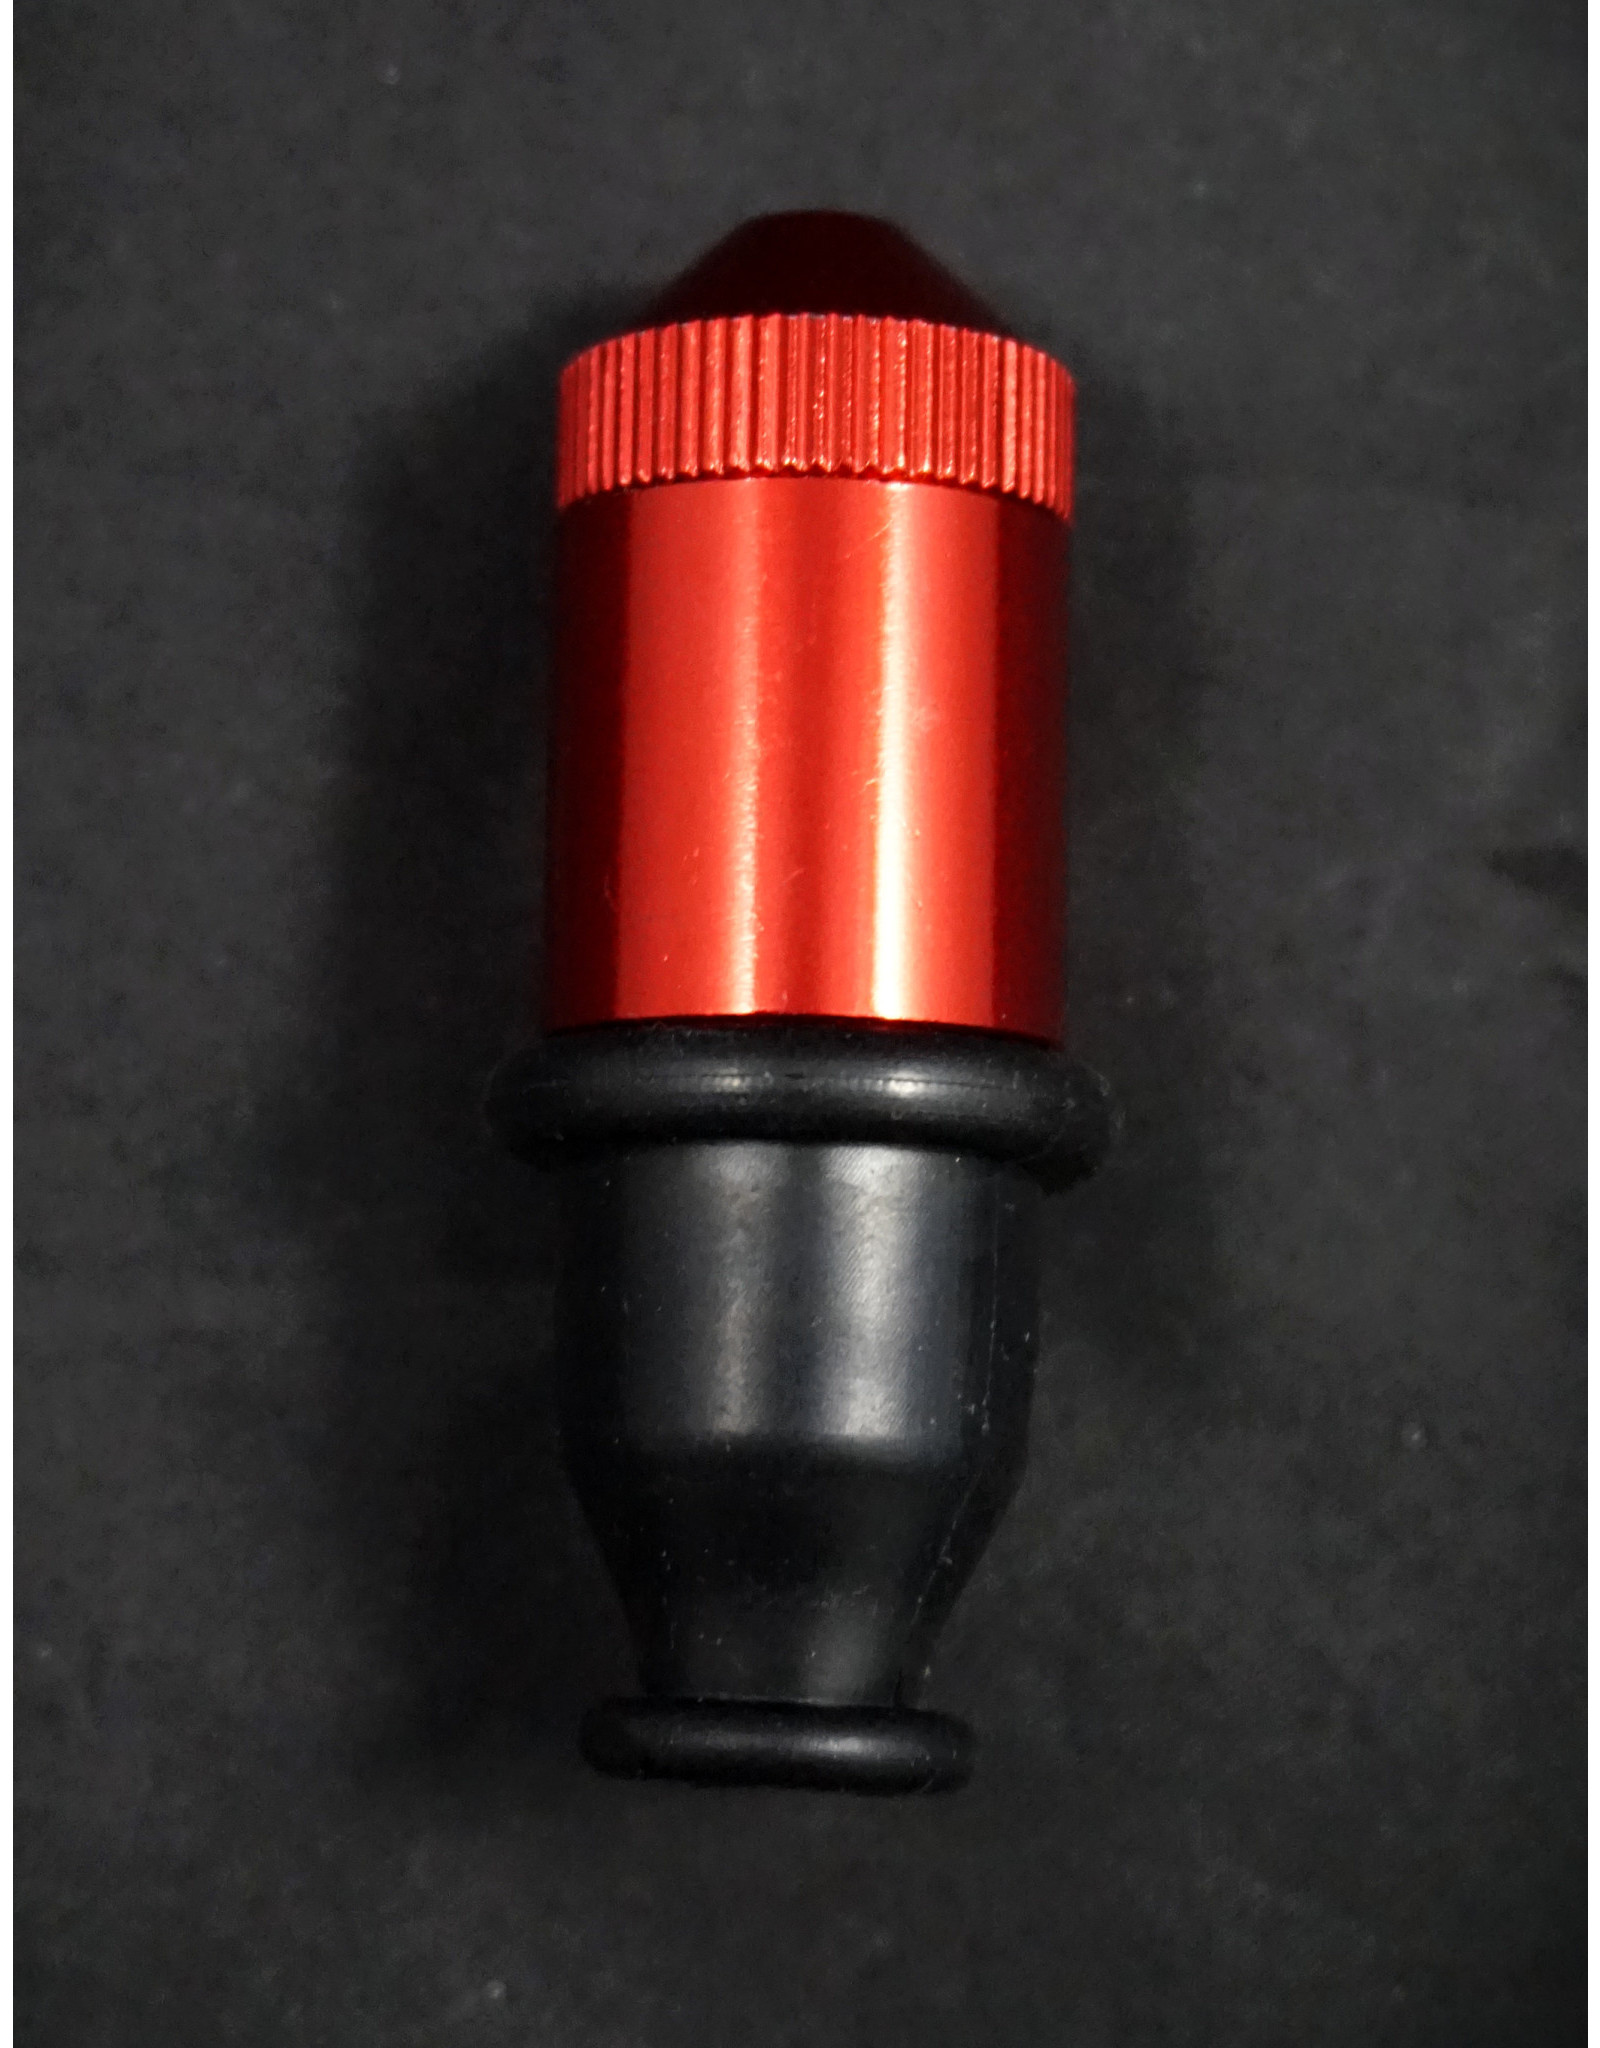 Aluminum Anodized Bullet - Red